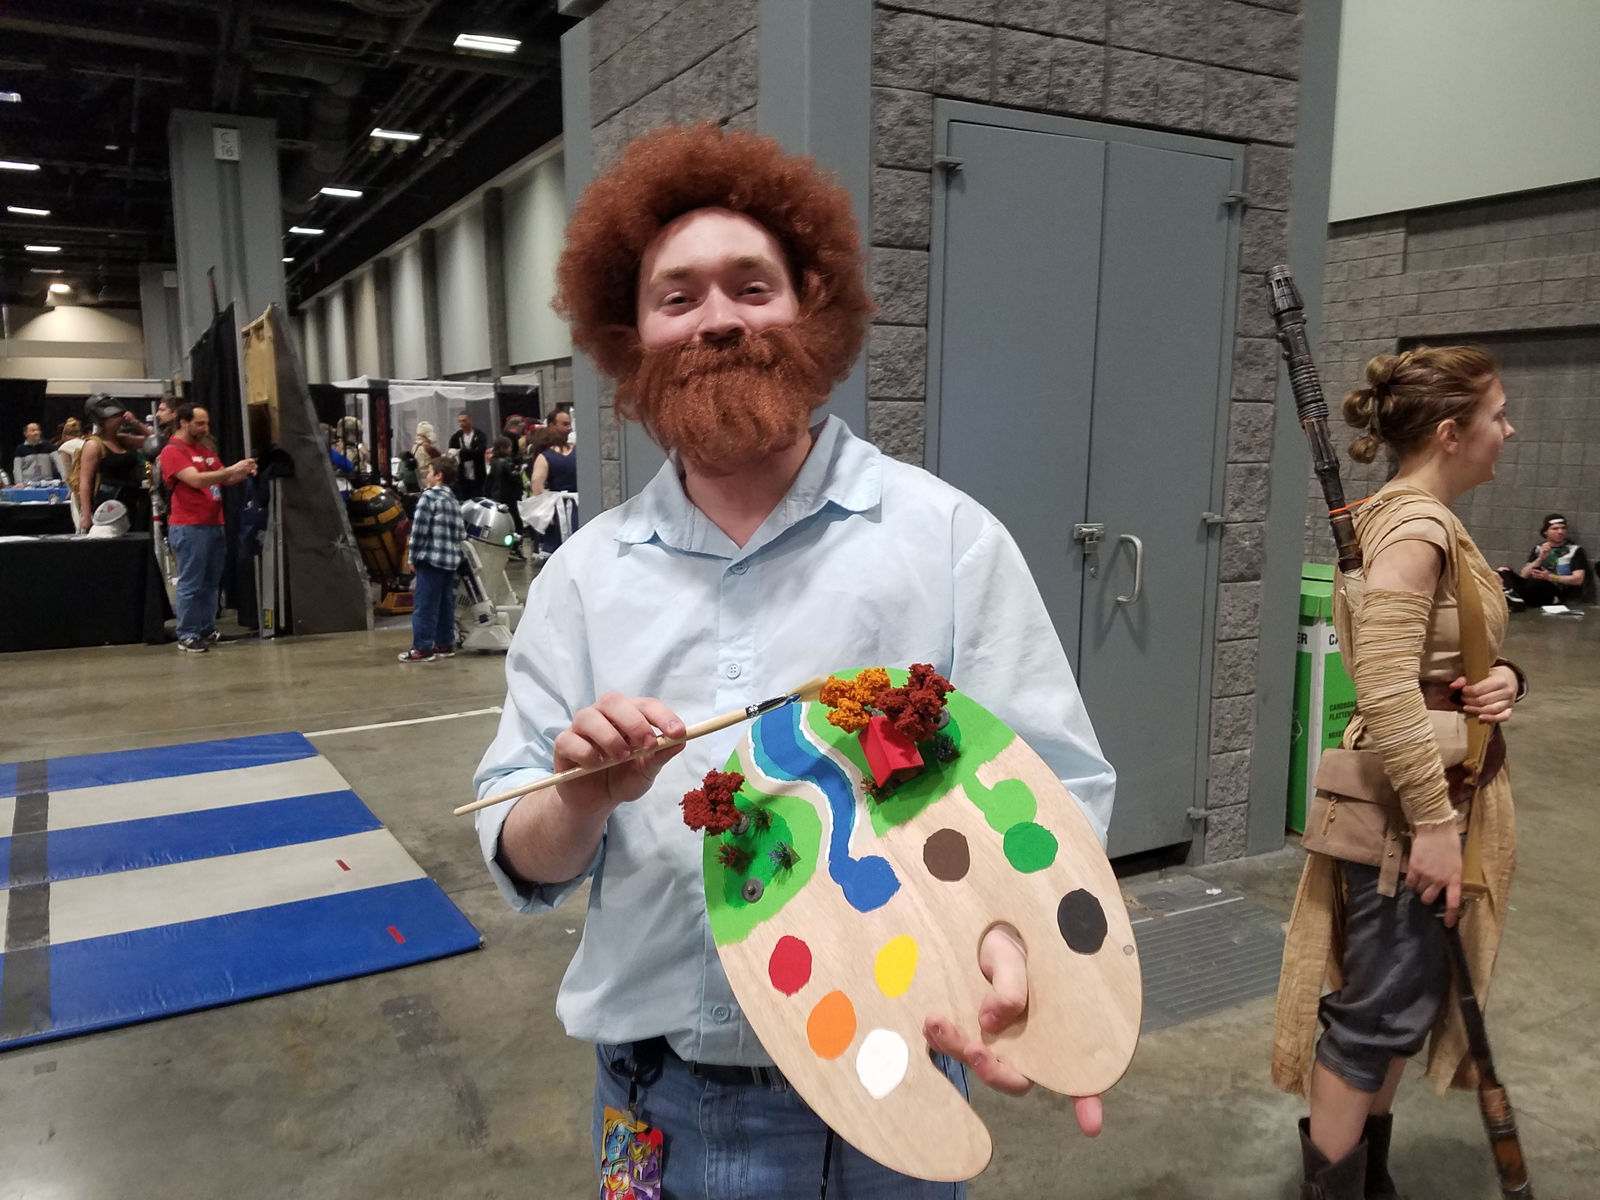 A man dressed as painter Bob Ross with several happy little trees on his palette. (WTOP/Will Vitka)